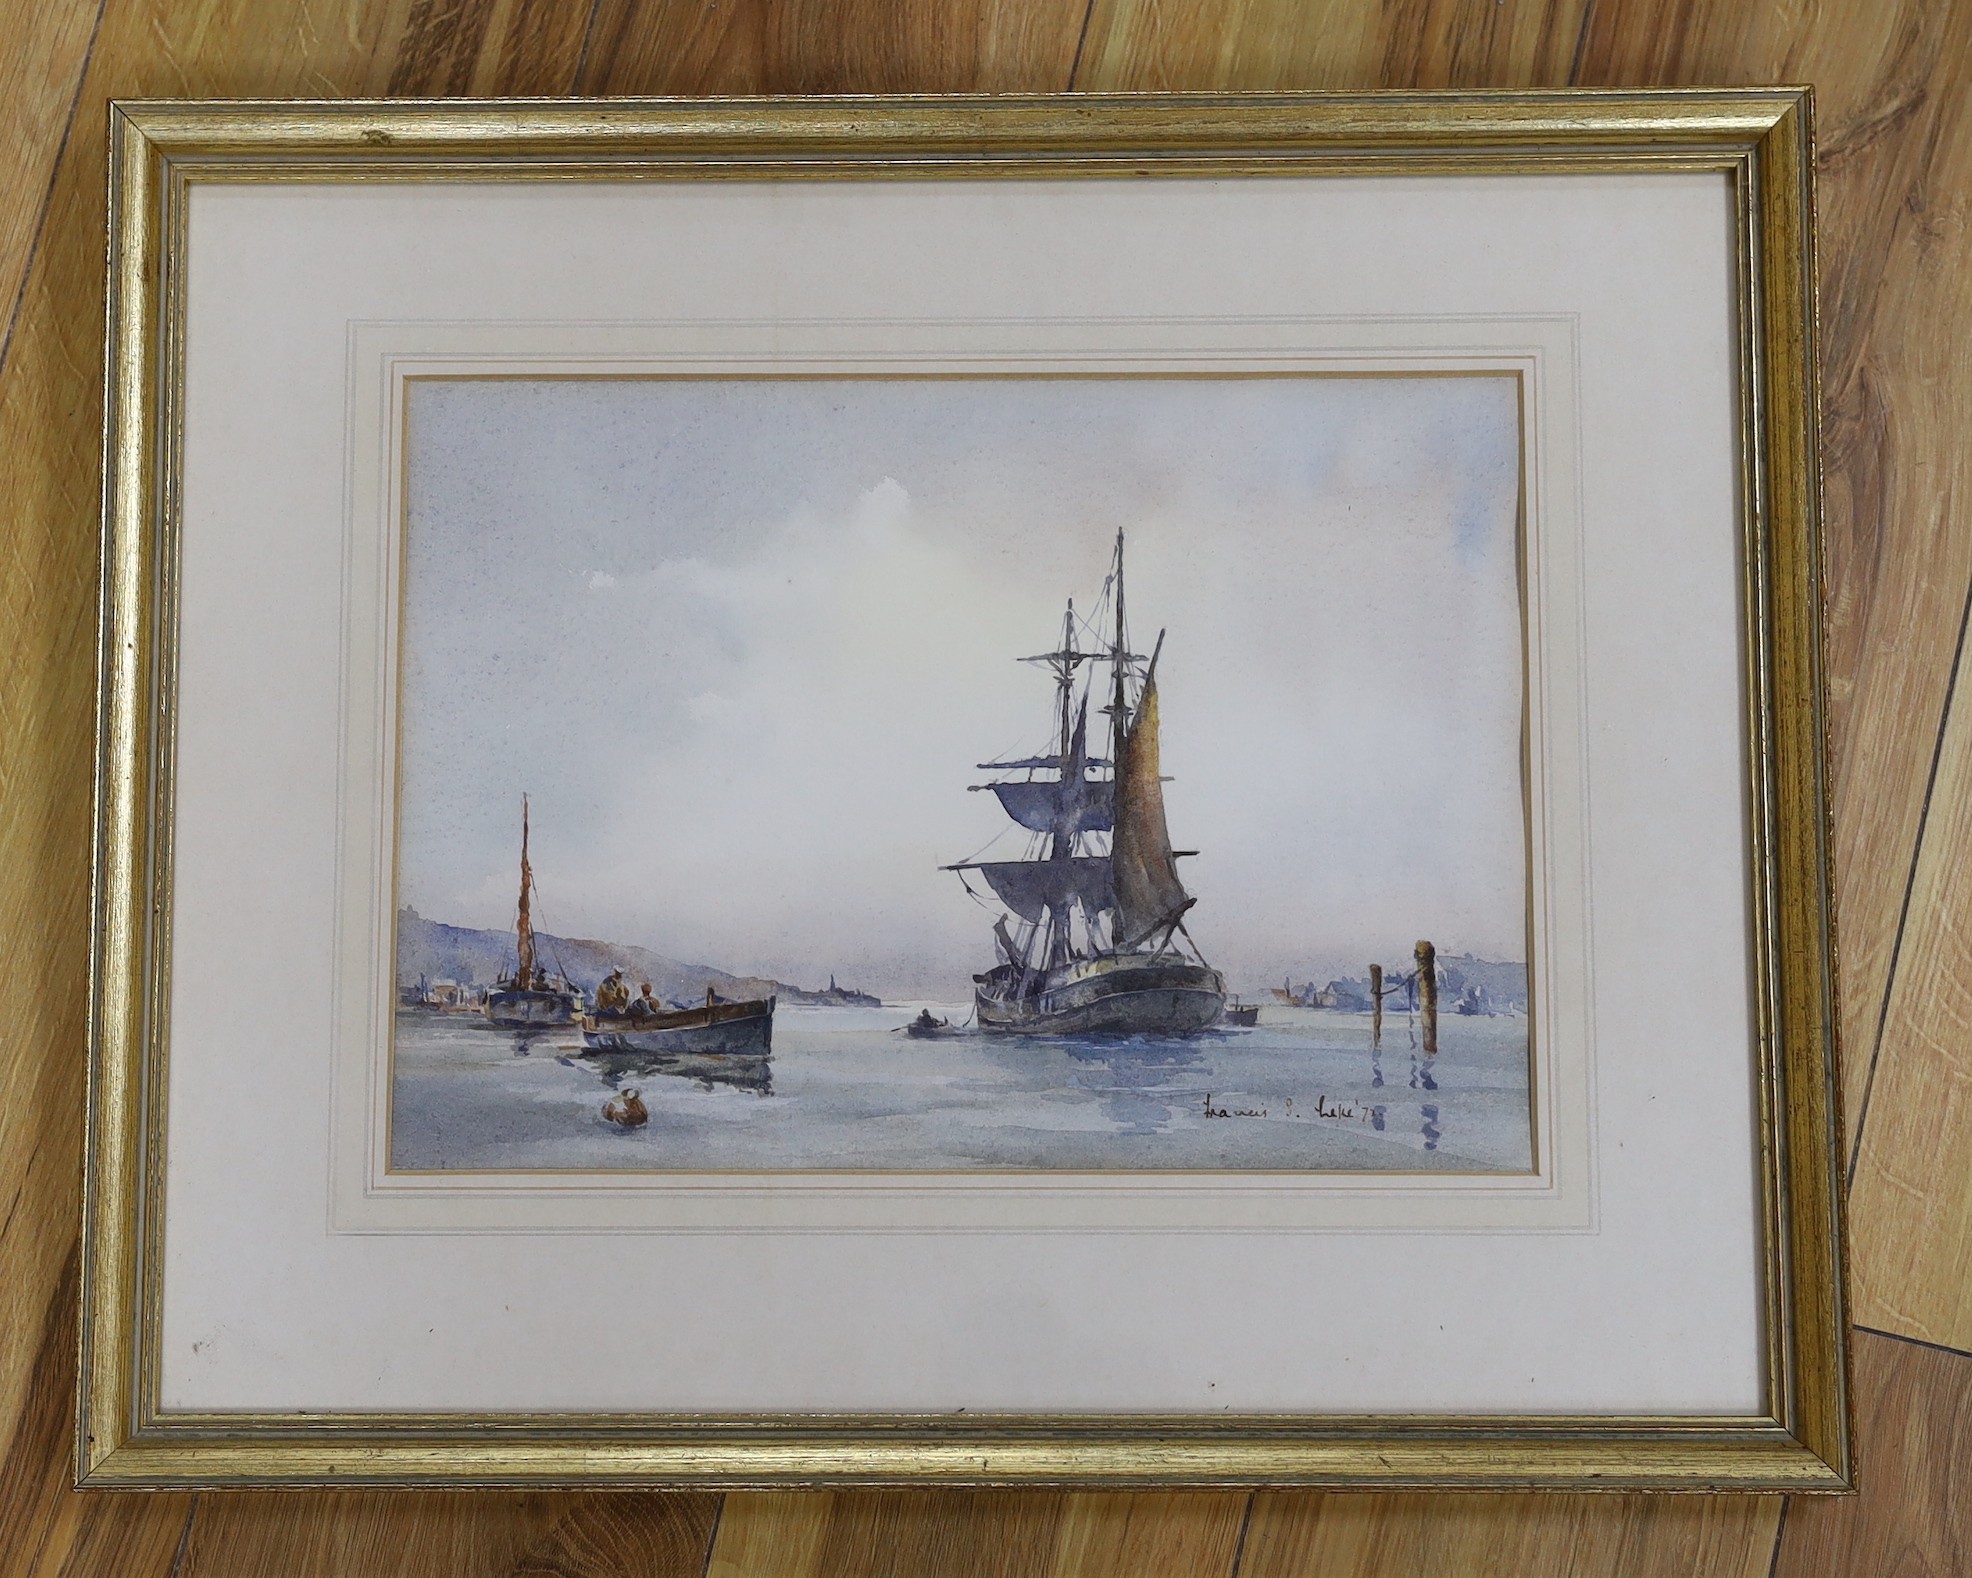 Francis S. Leke (b.1912), watercolour, Shipping on an estuary, signed and dated .72, 25 x 36cm